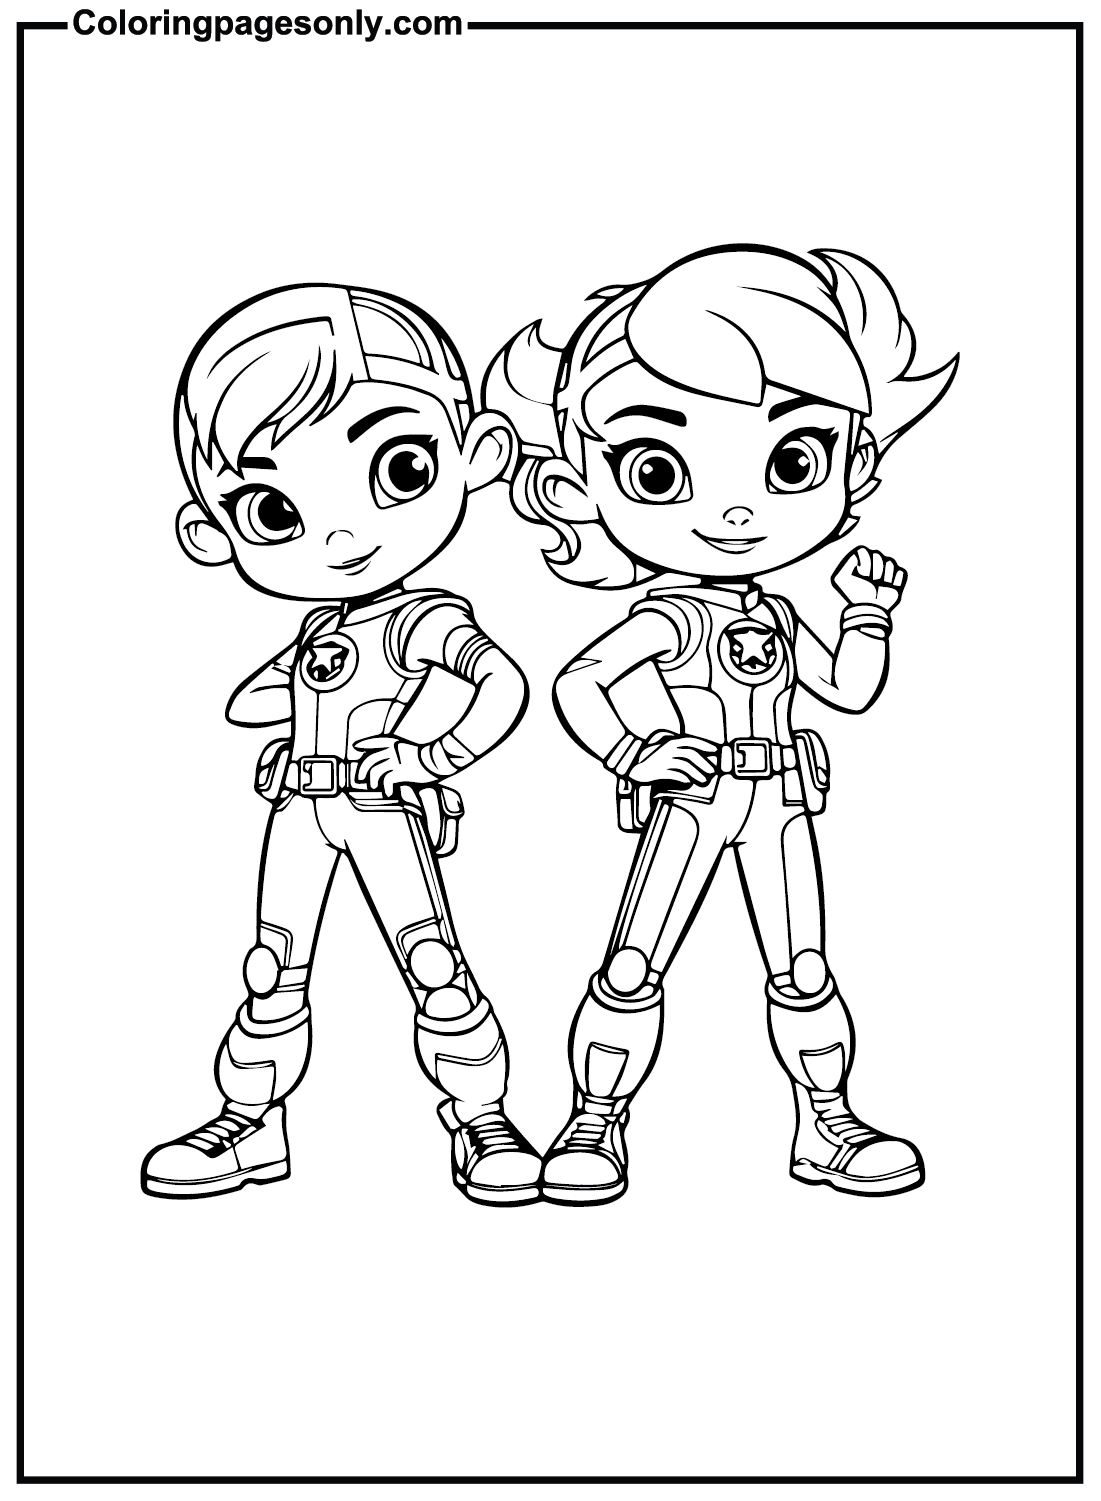 Images Rainbow Rangers Coloring Pages - Rainbow Rangers Coloring Pages - Coloring  Pages For Kids And Adults